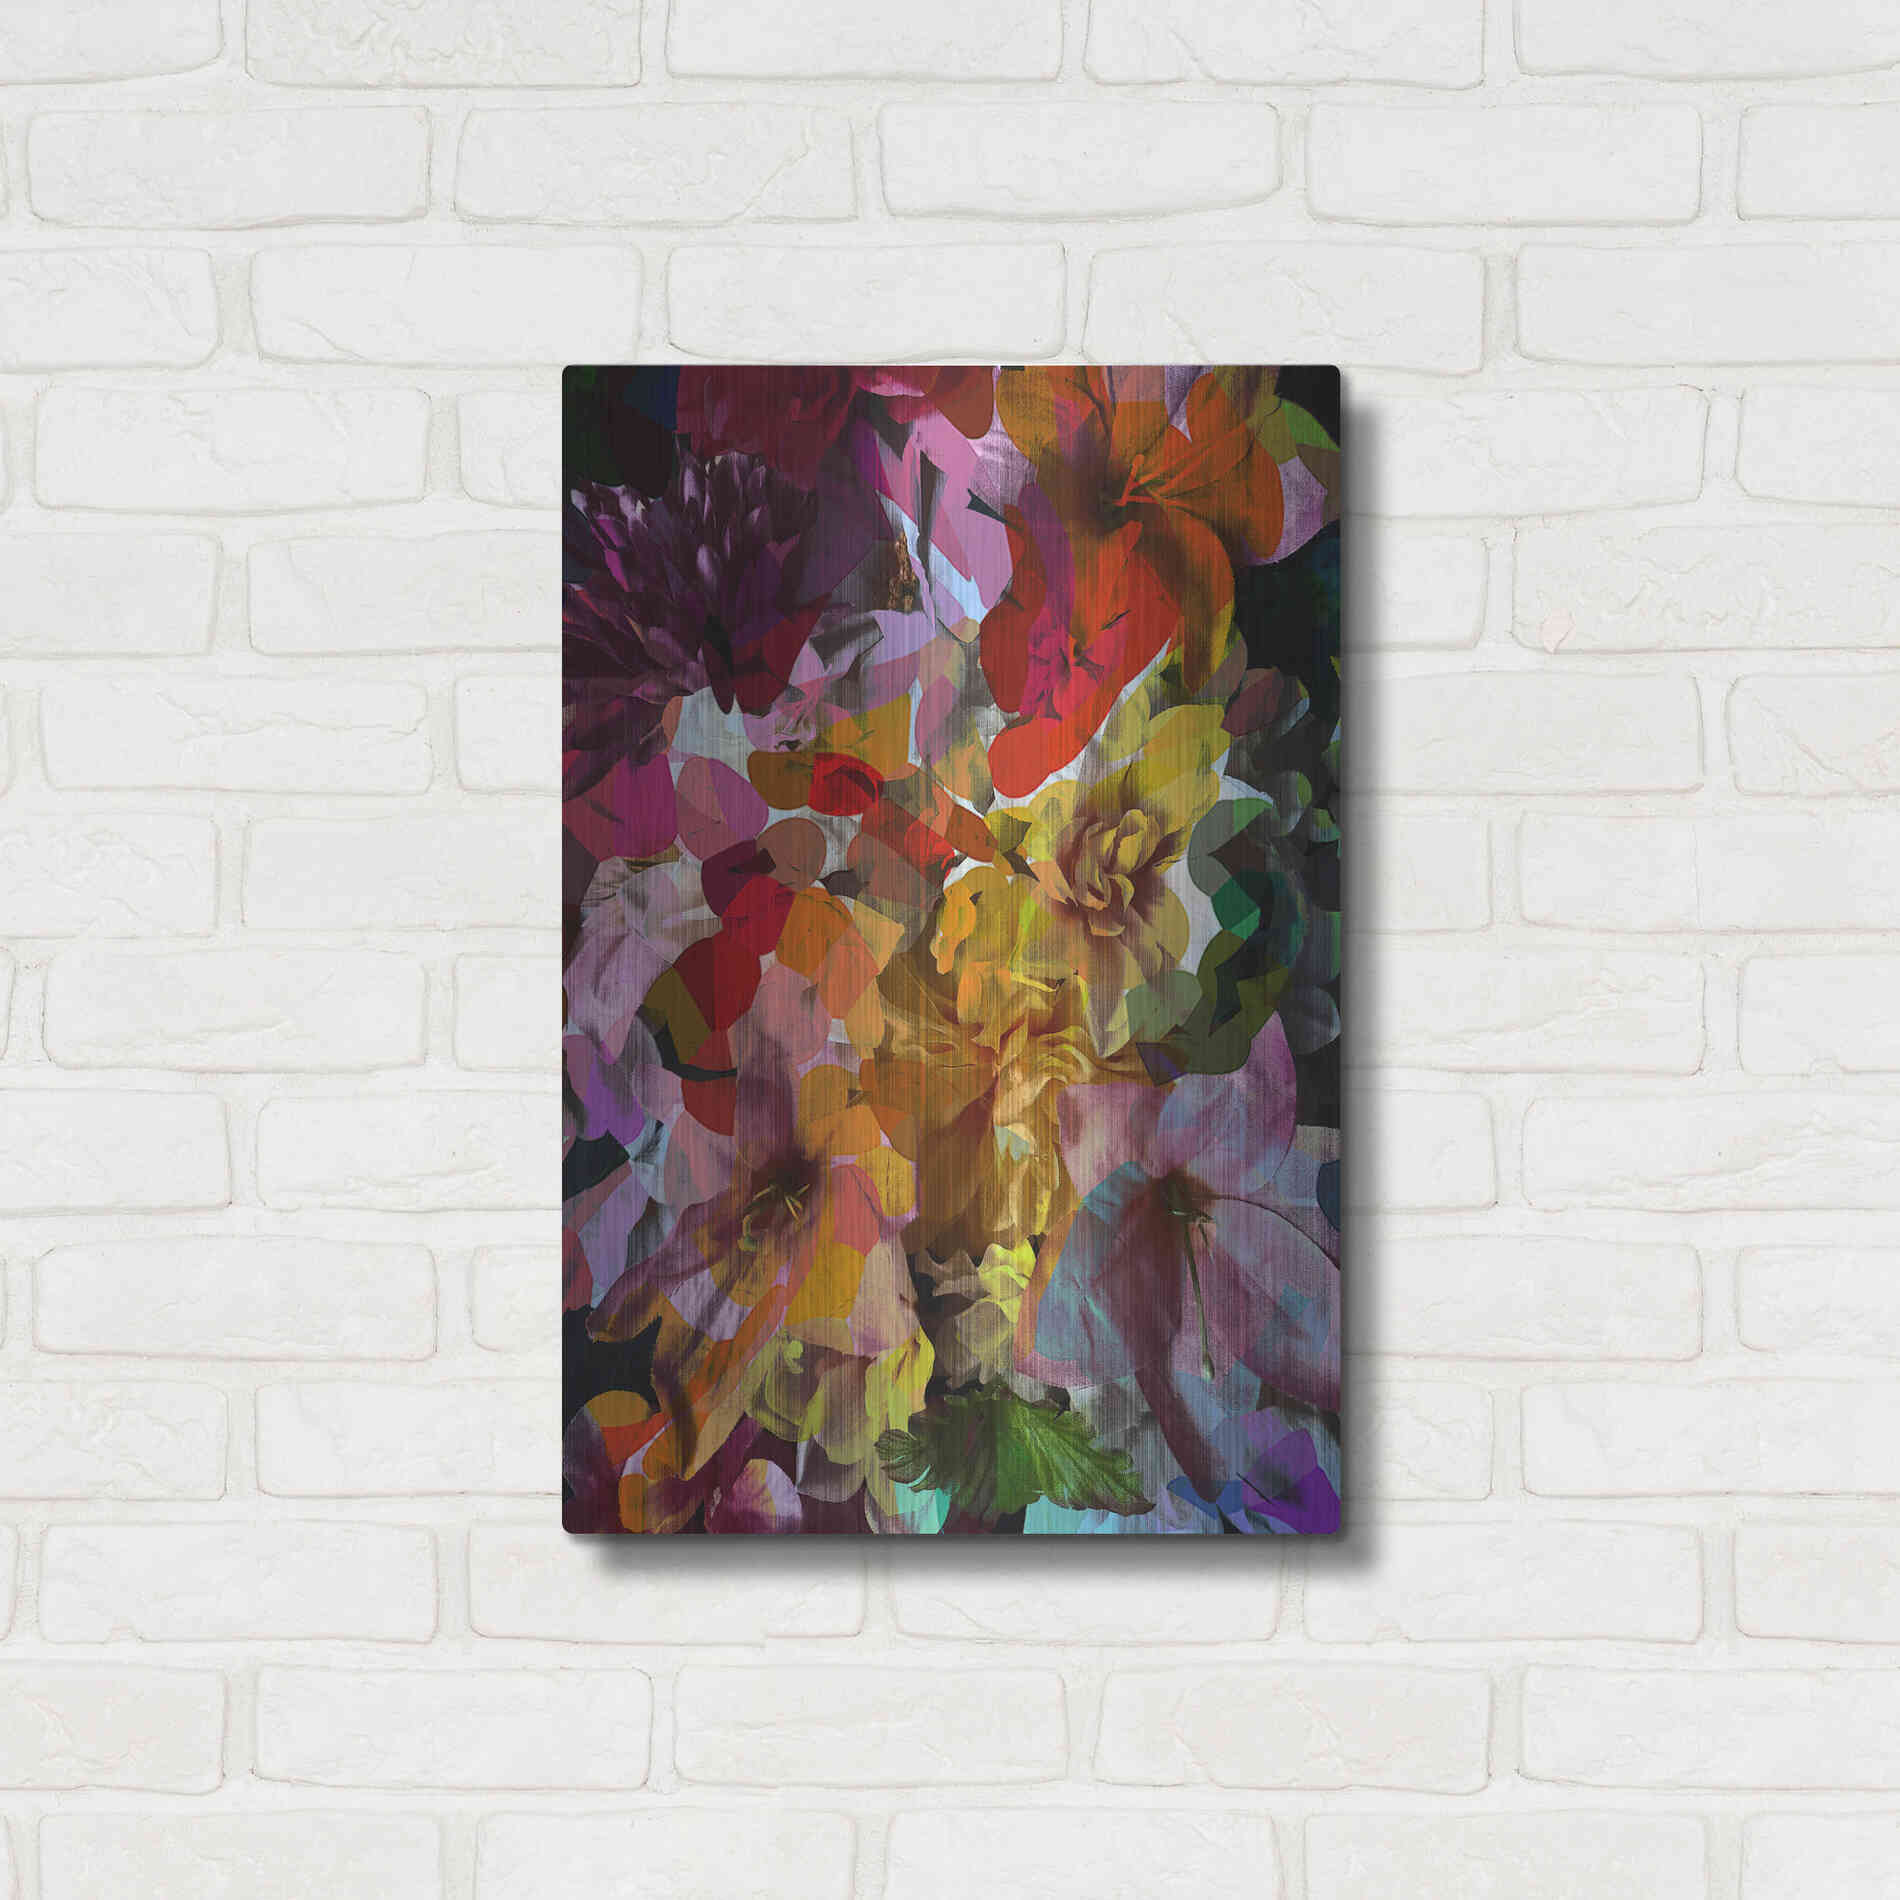 Luxe Metal Art 'Abstract Floral' by Shandra Smith, Metal Wall Art,16x24